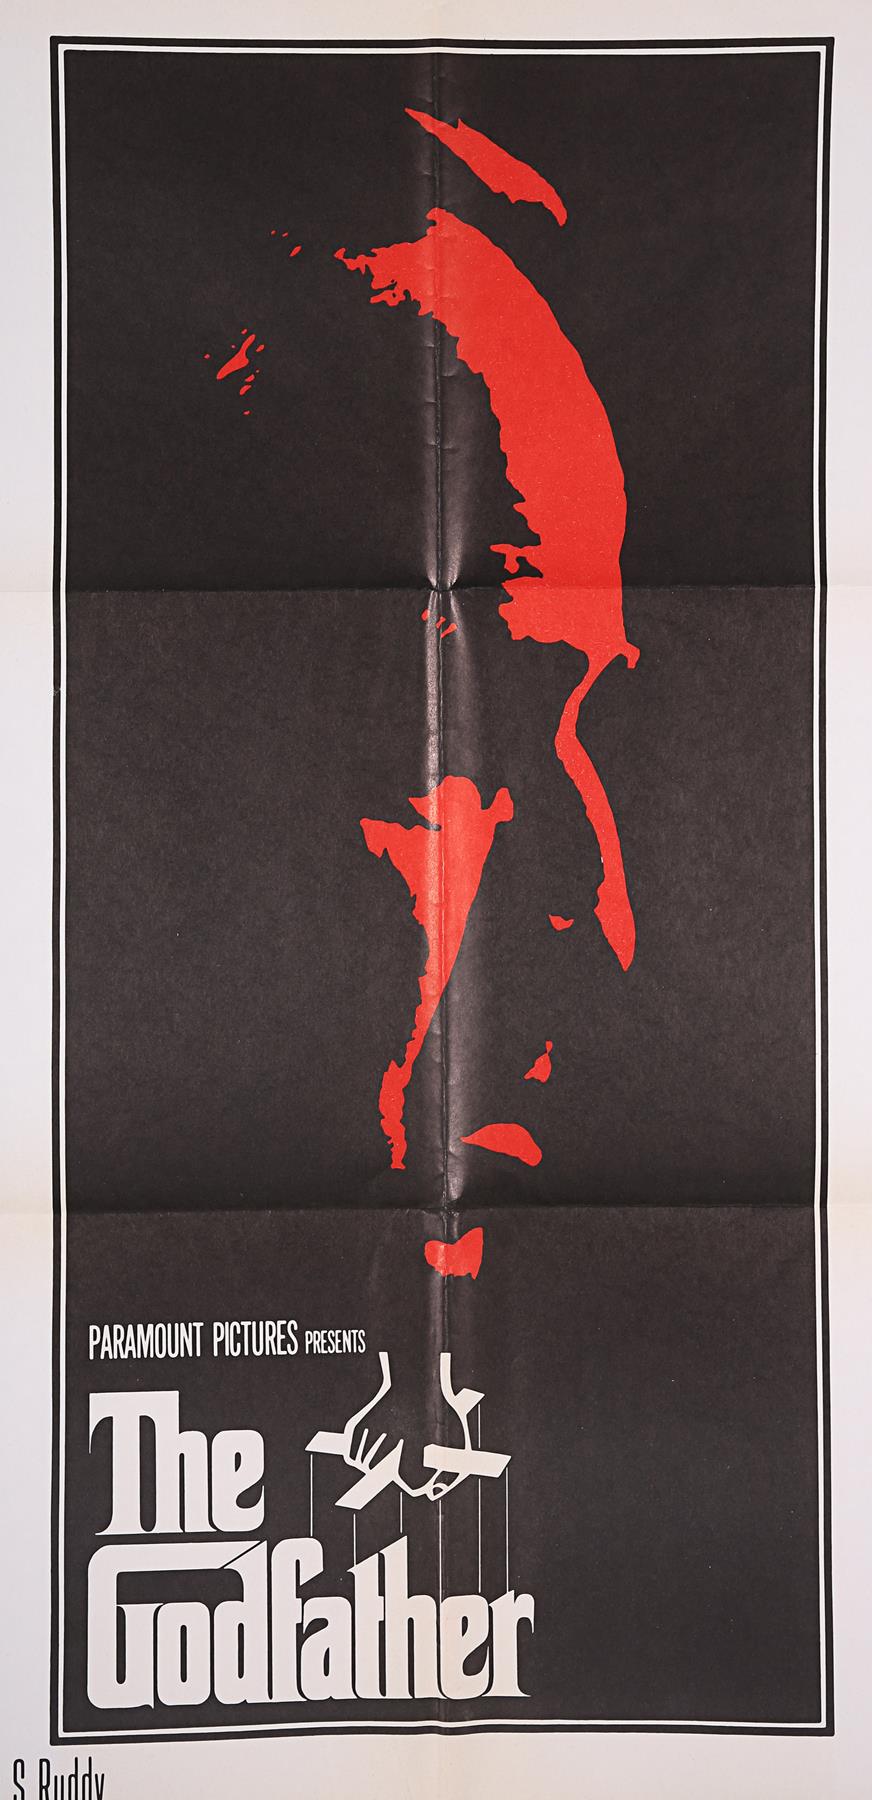 THE GODFATHER (1972) - UK One-Sheet Poster, 1972 - Image 2 of 5